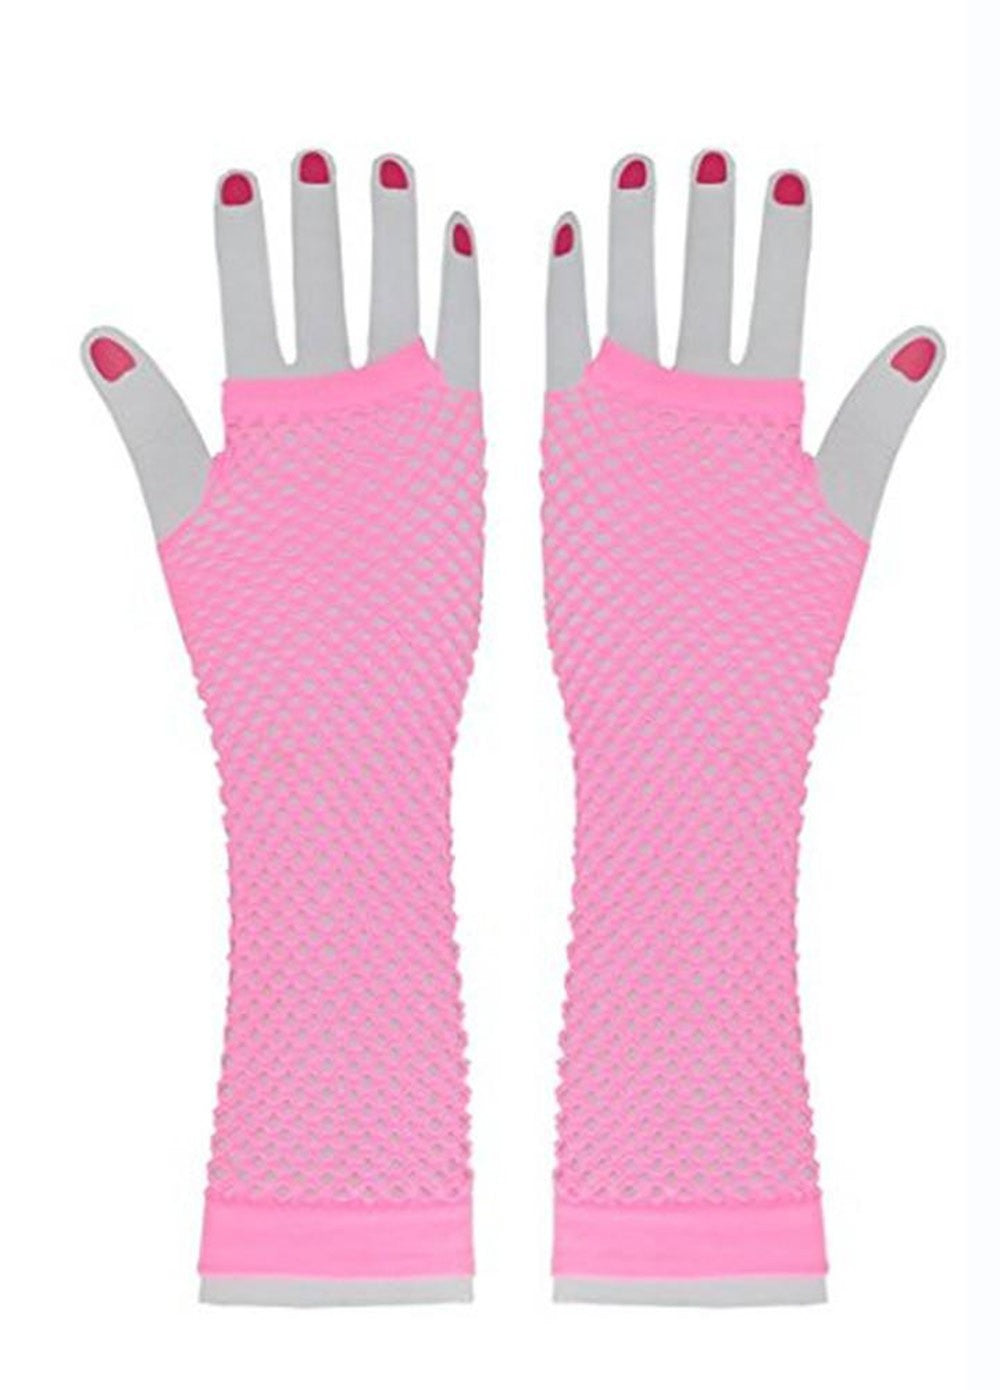 Fingerless Fishnet Gloves for Women for 80s 90s Party Cosplay Costume Accessories Fancy Dress Costume Accessory